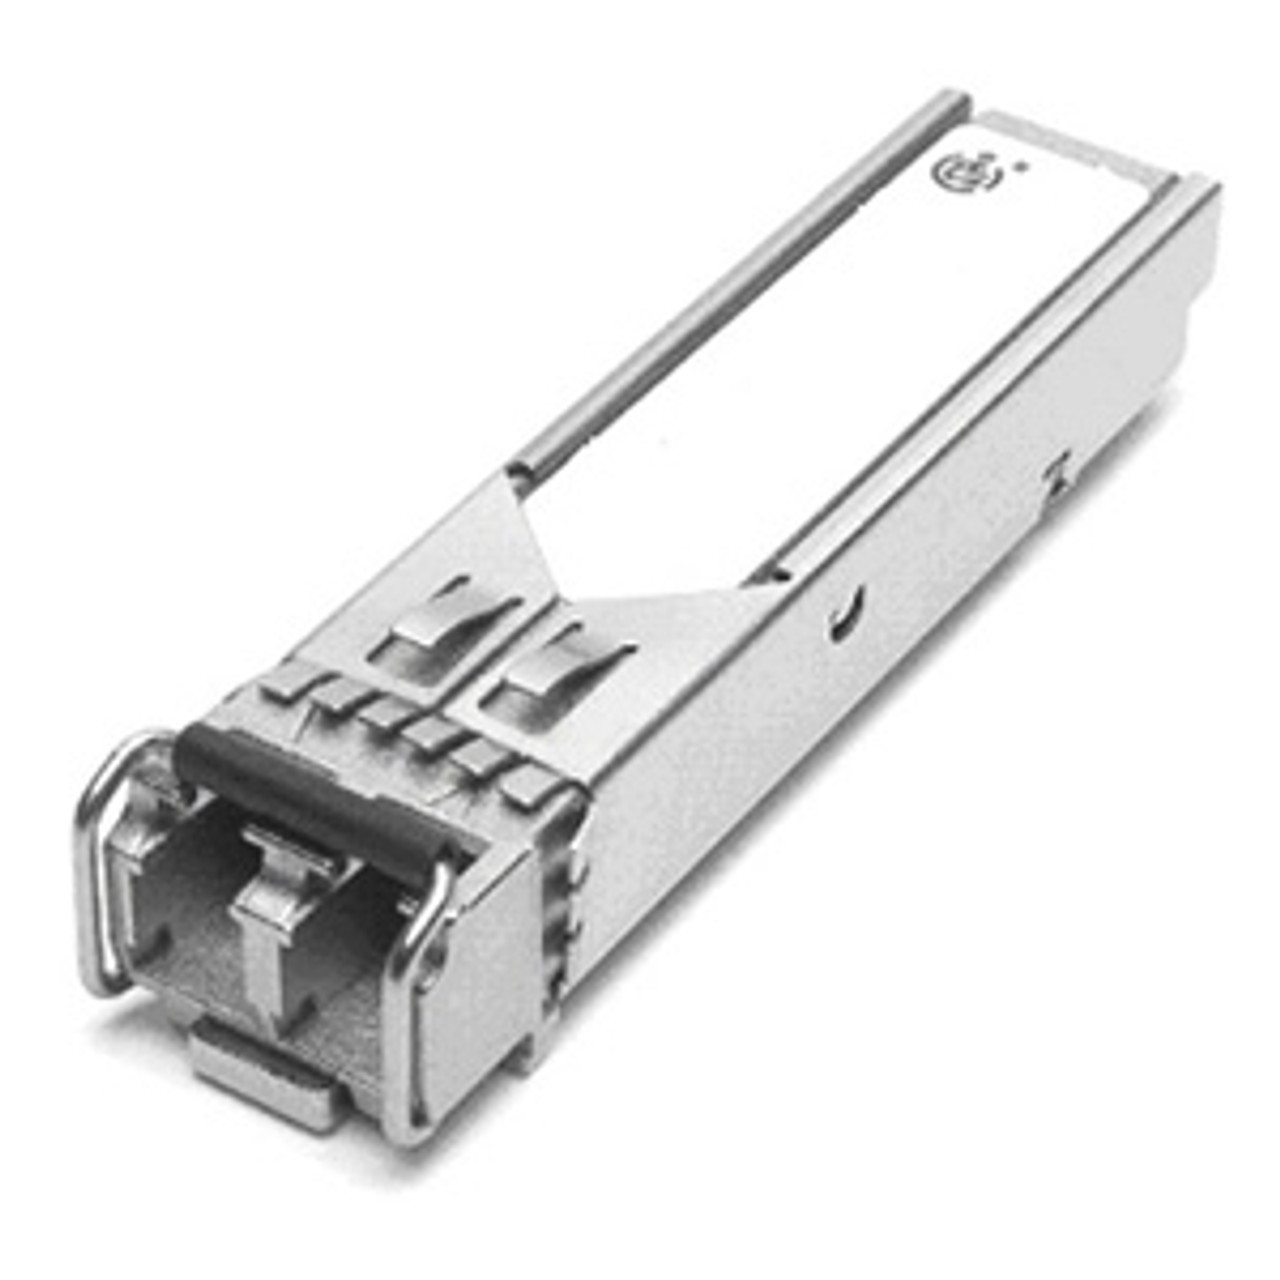 990-00038-00 Allied Telesis AT-SPZX80/1490 1.25Gbps 1000Base-ZX Single-mode Fiber 80km 1490nm LC Connector SFP Transceiver Module